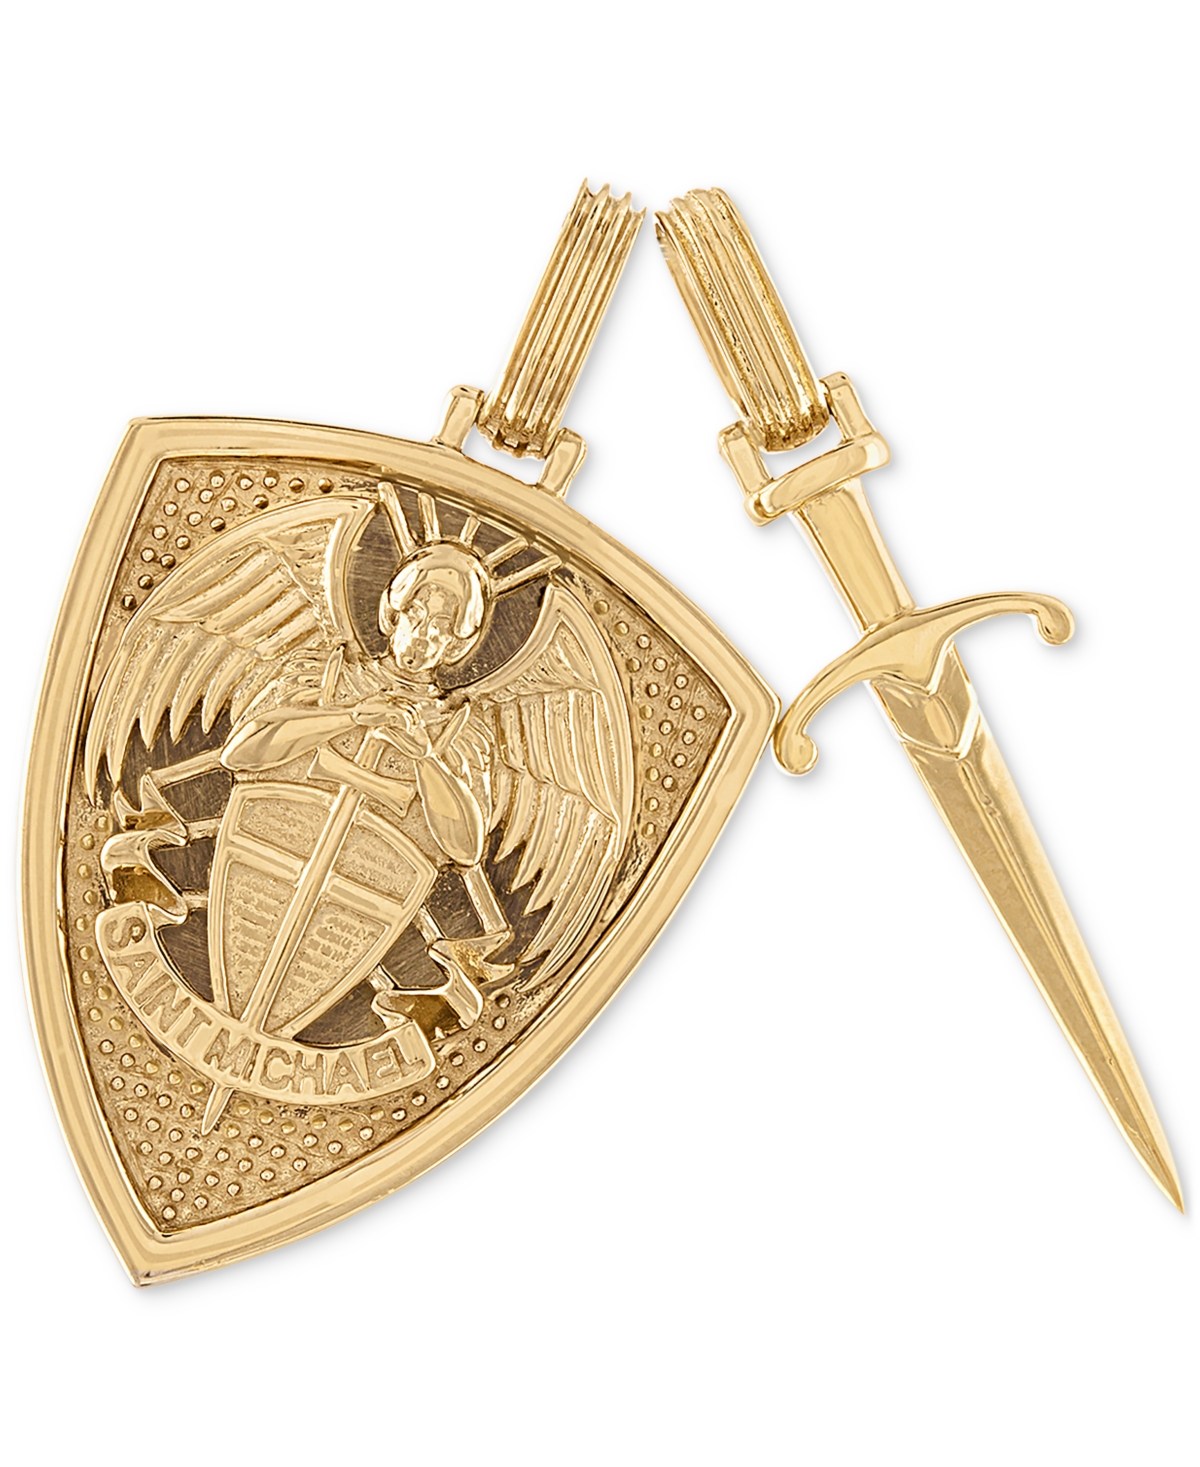 2-Pc. Set Saint Michael Shield & Sword Amulet Pendants in 14k Gold-Plated Sterling Silver, Created for Macy's - Gold Over Silver